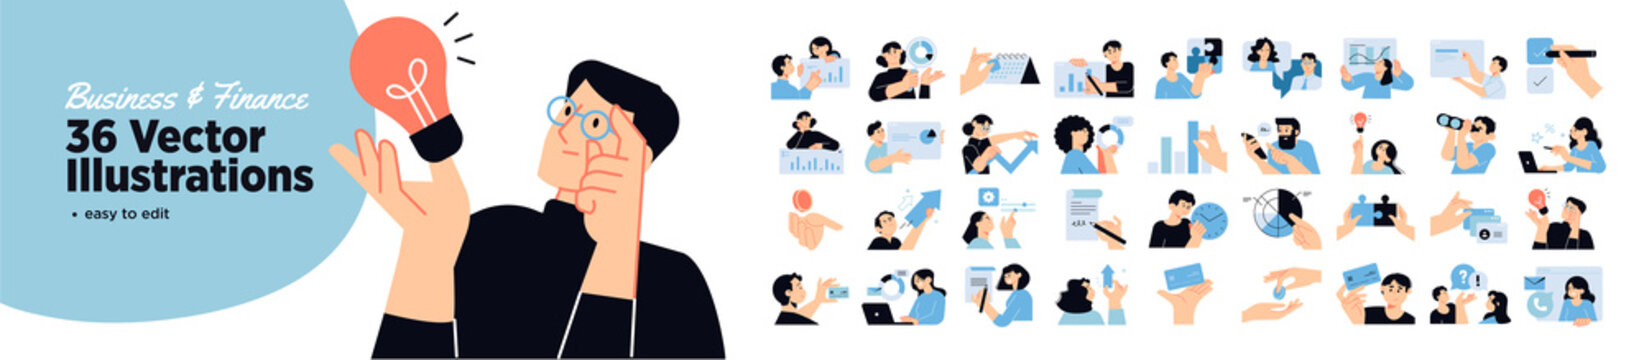 Set of business and finance people illustrations. Flat design vector illustrations of business, management, payment, market research and data analysis, communication. 